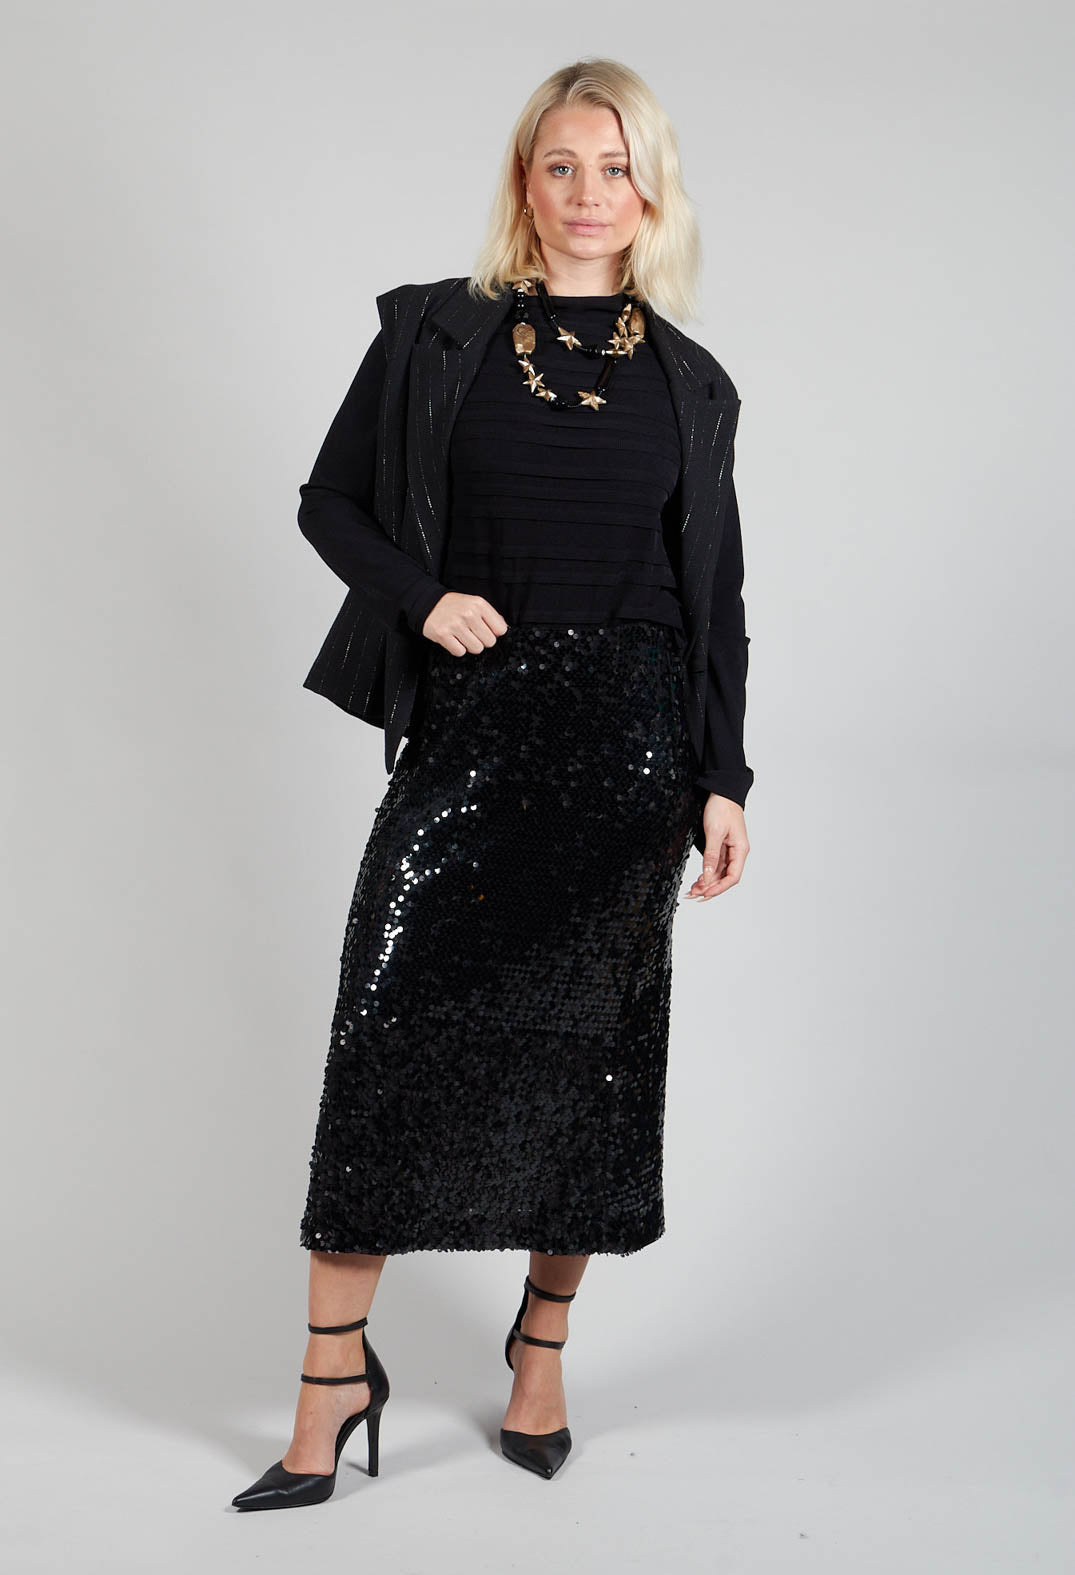 Skirt with Sequin Detail in Black